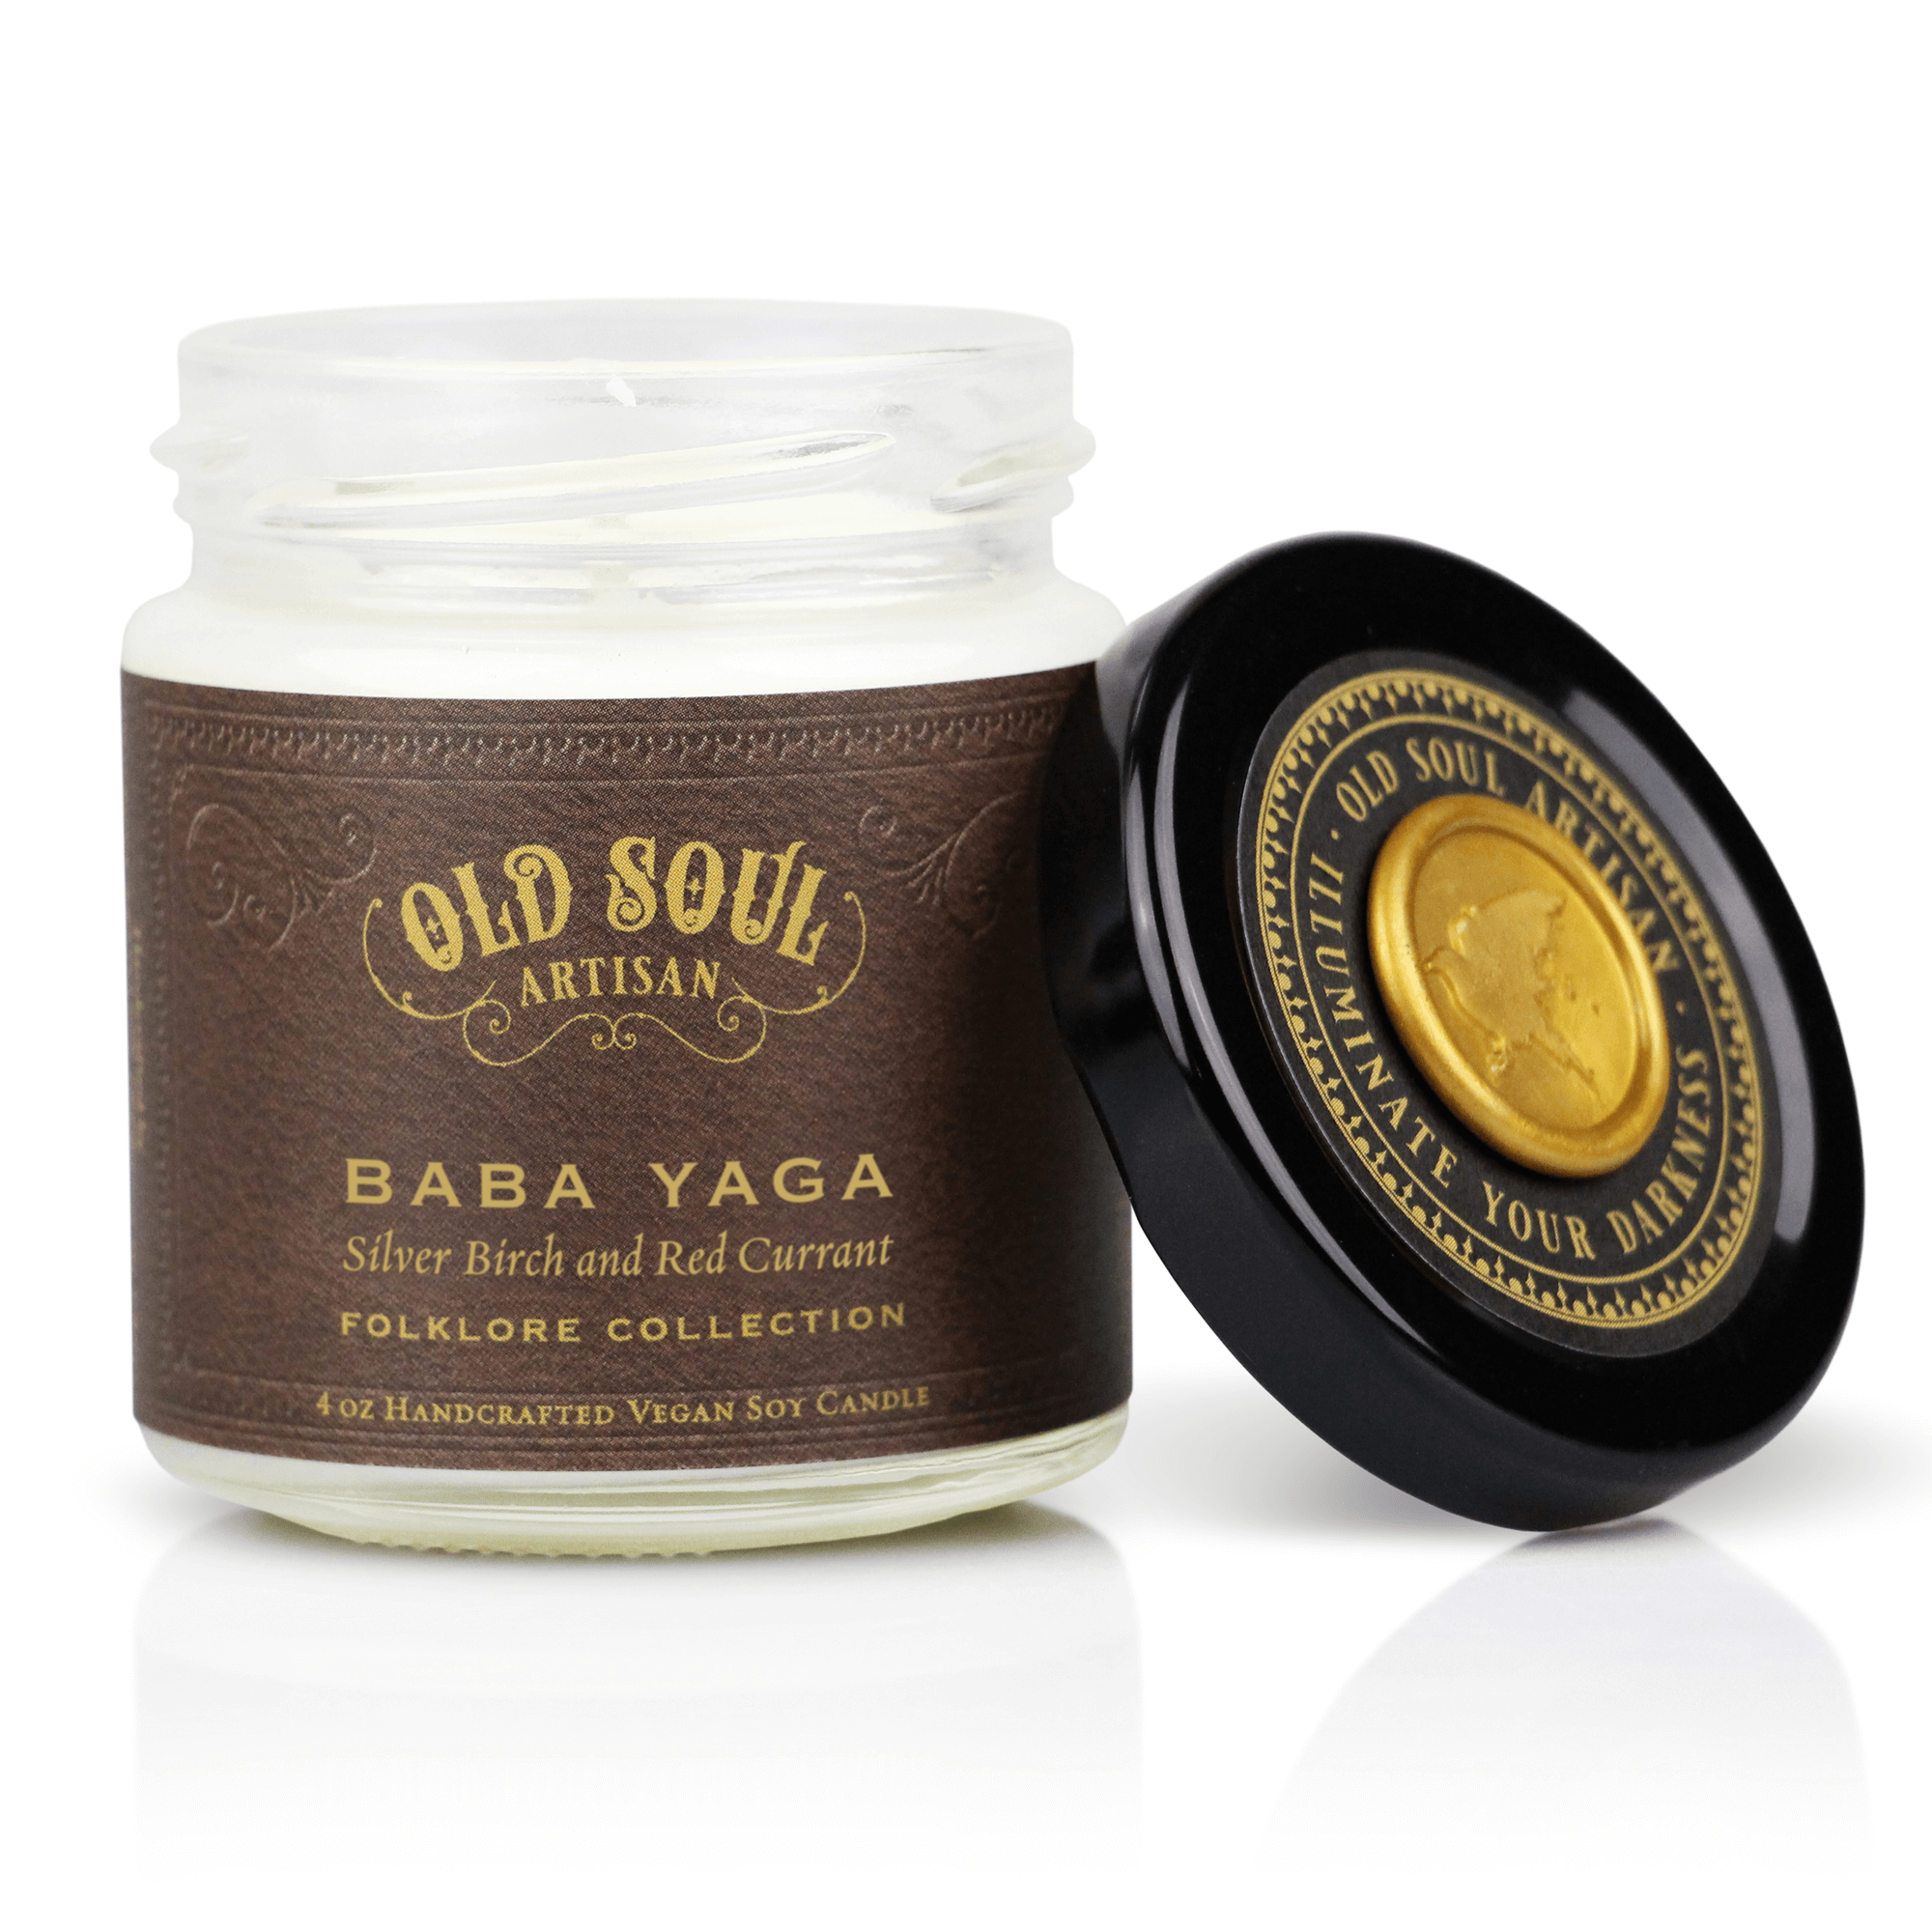 Baba Yaga Soy Candle (silver birch and red currant)